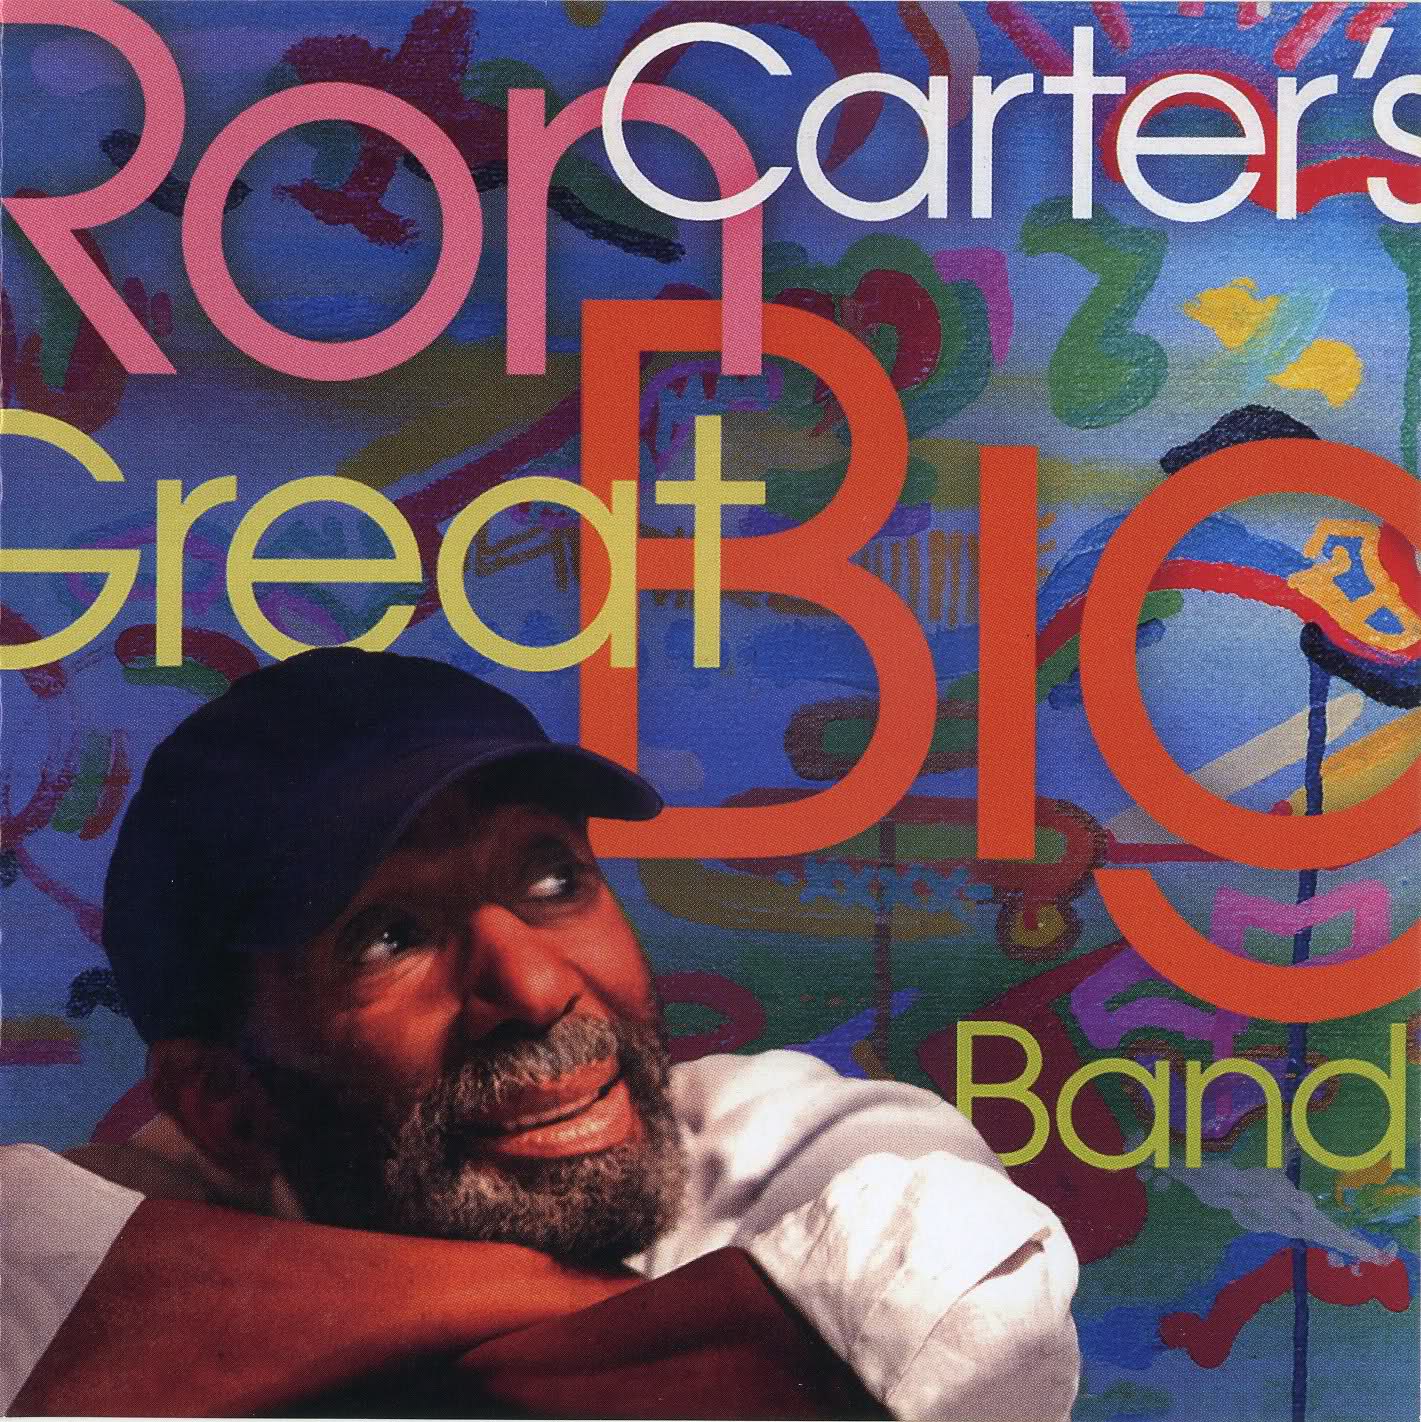 RON CARTER - Ron Carter's Great Big Band cover 